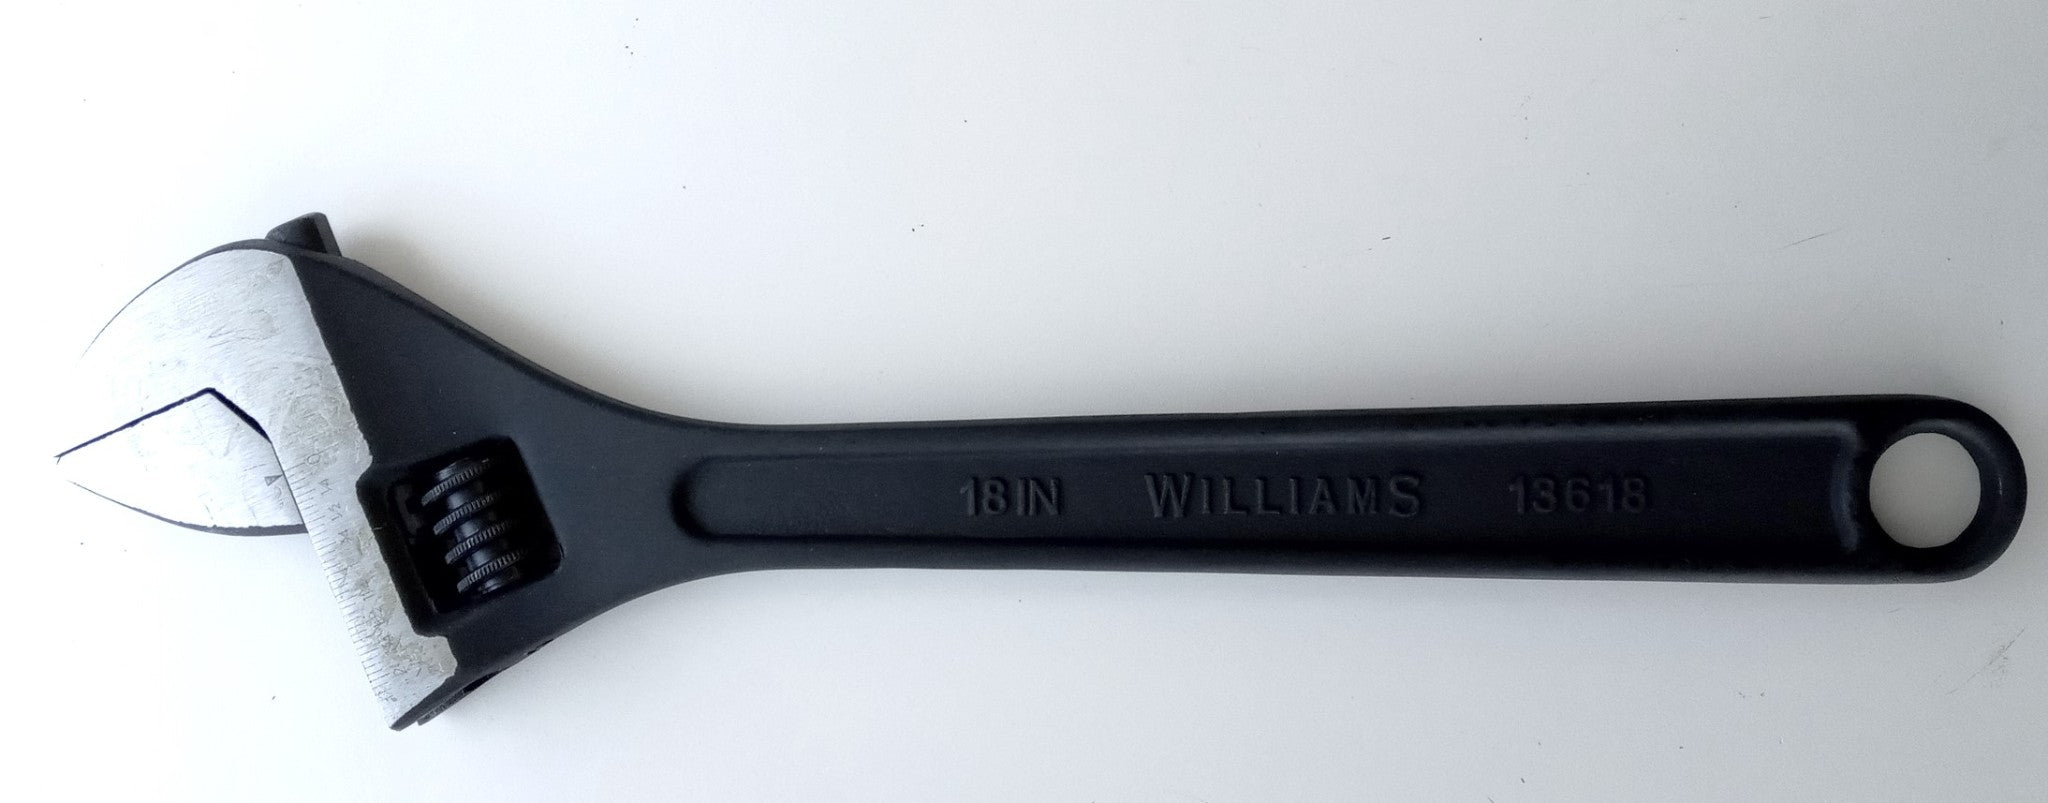 Williams 13618 Black 18in (450mm) Adjustable Wrench